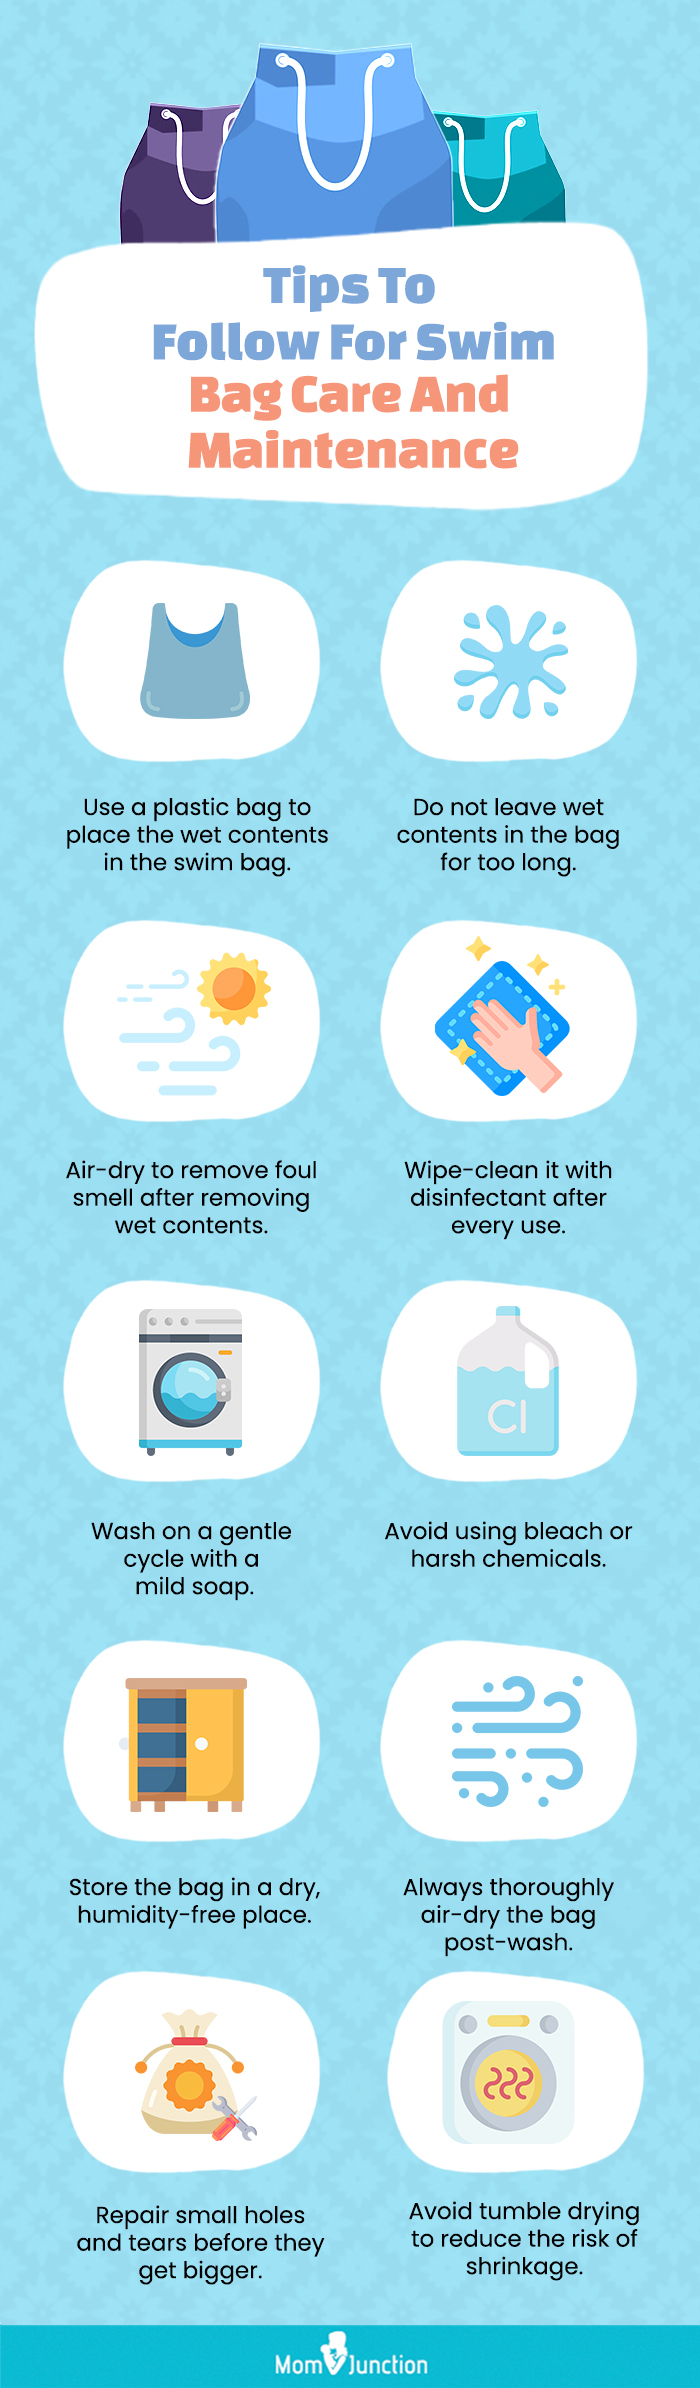 Tips To Follow For Swim Bag Care And Maintenance (infographic)